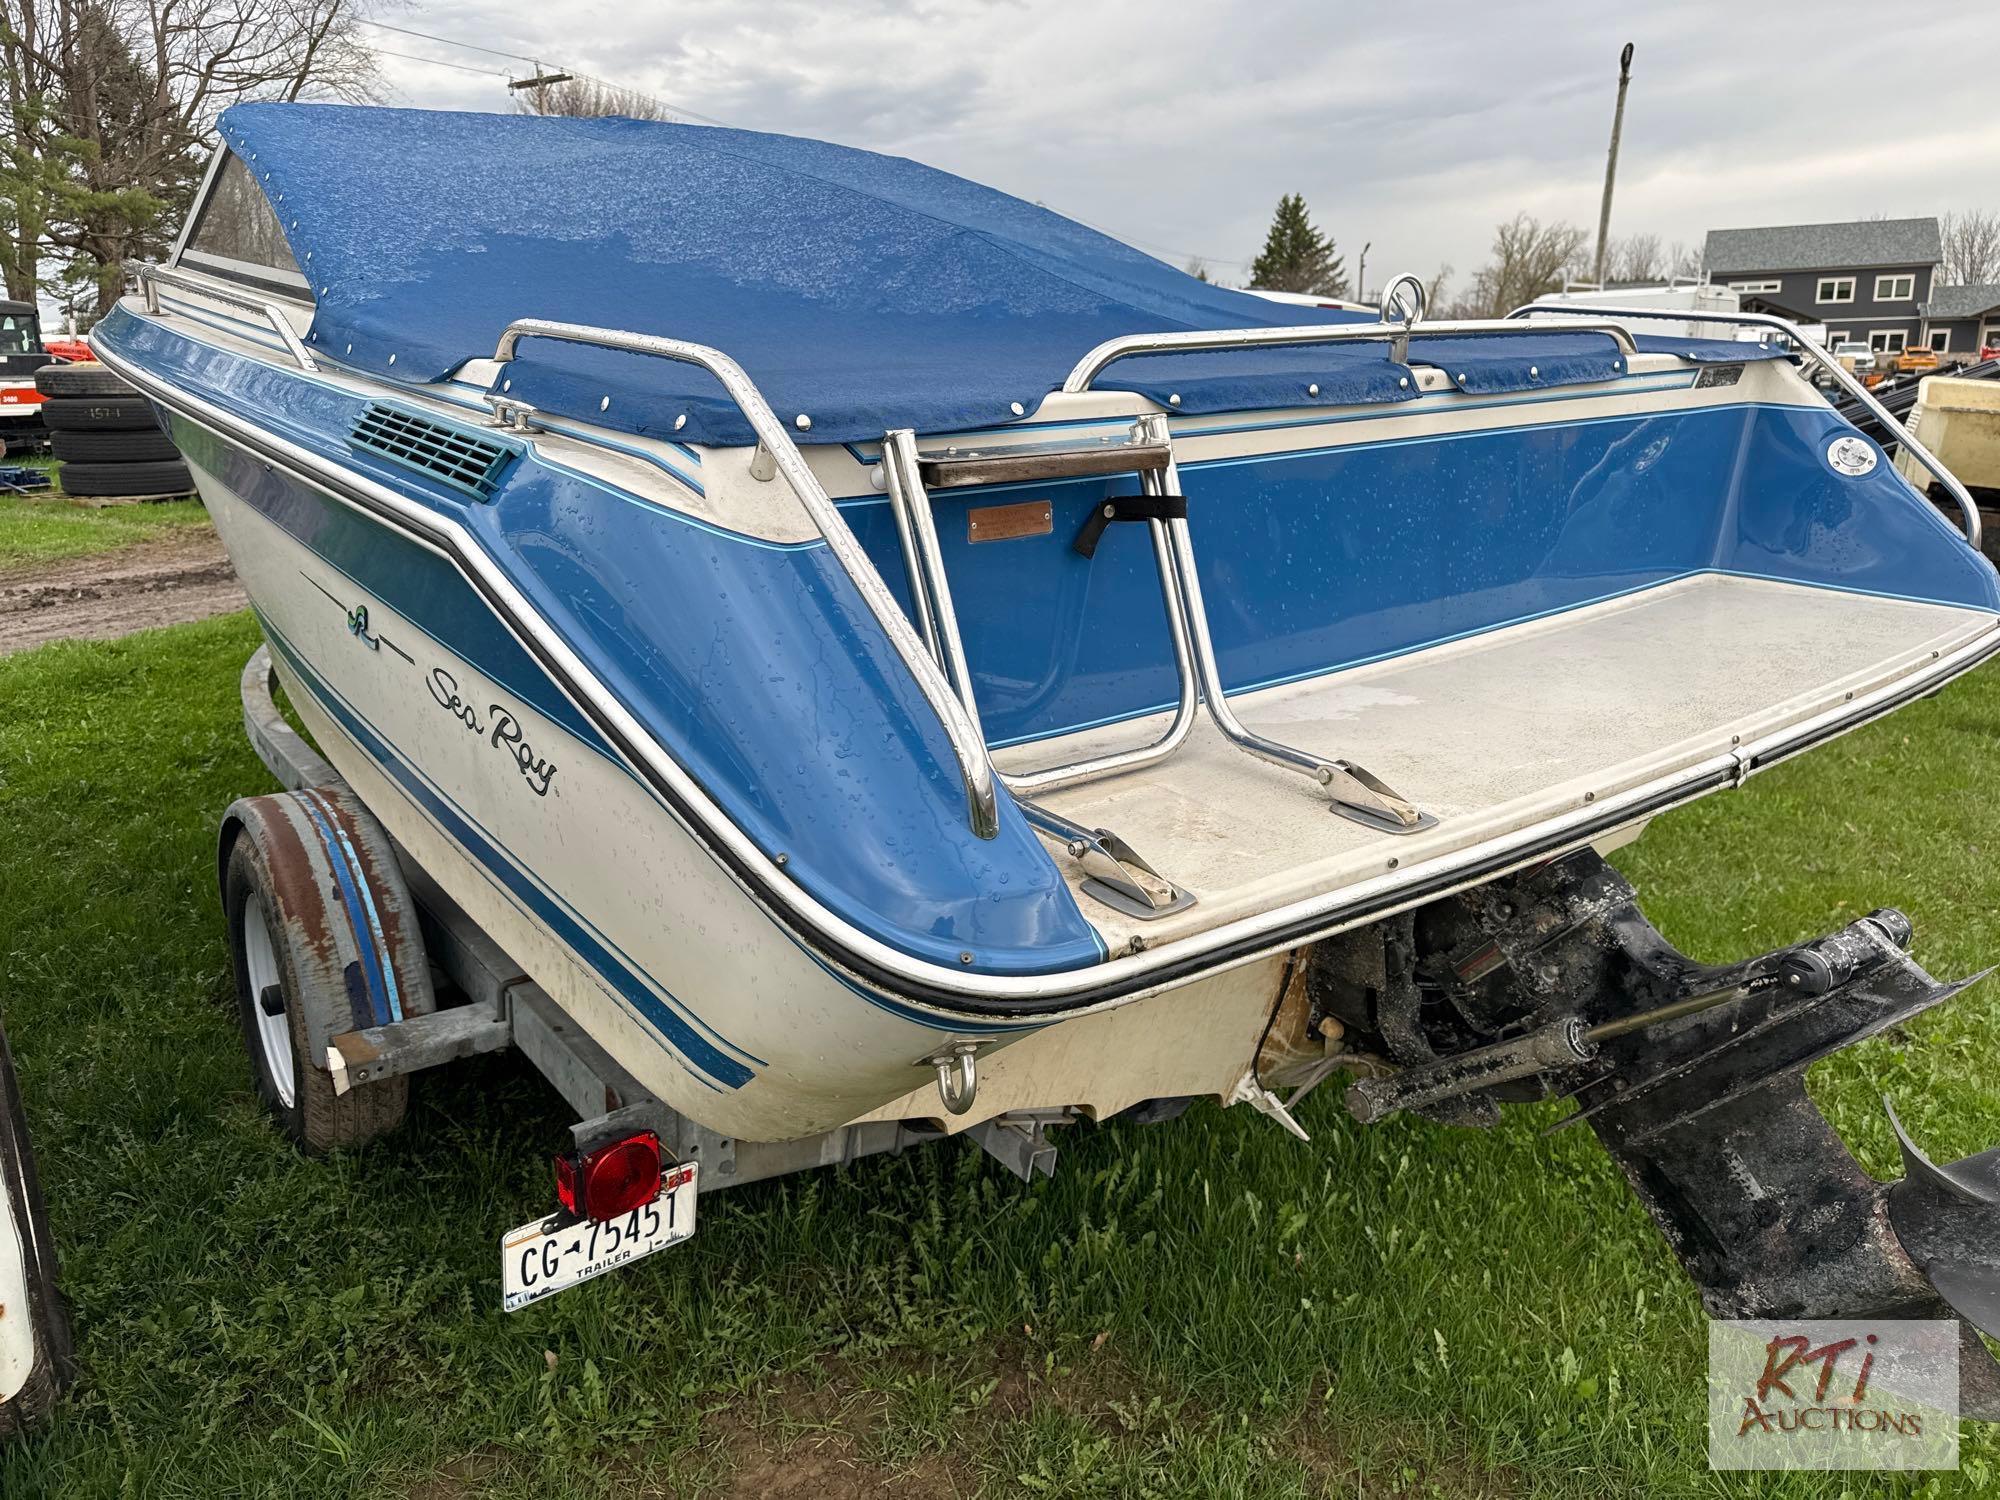 1987 Sea Ray 21ft boat with inboard motor, cover, VIN:SERC1840A787 on 2020 homemade galvanized